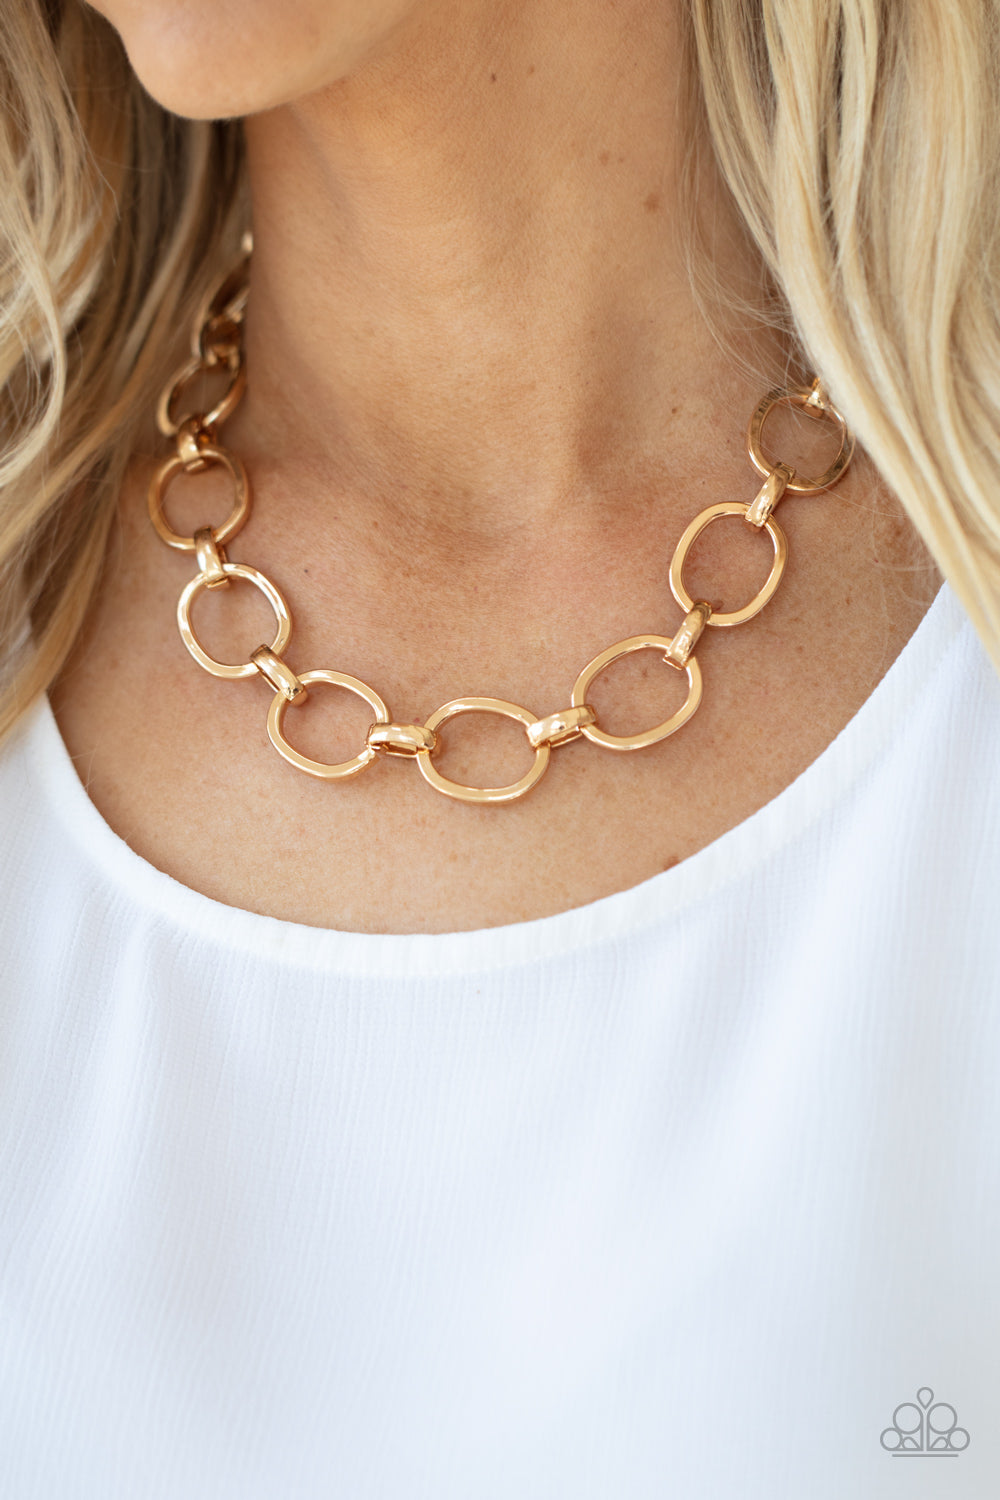 Paparazzi Accessories - HAUTE-ly Contested #N673 - Gold Necklace